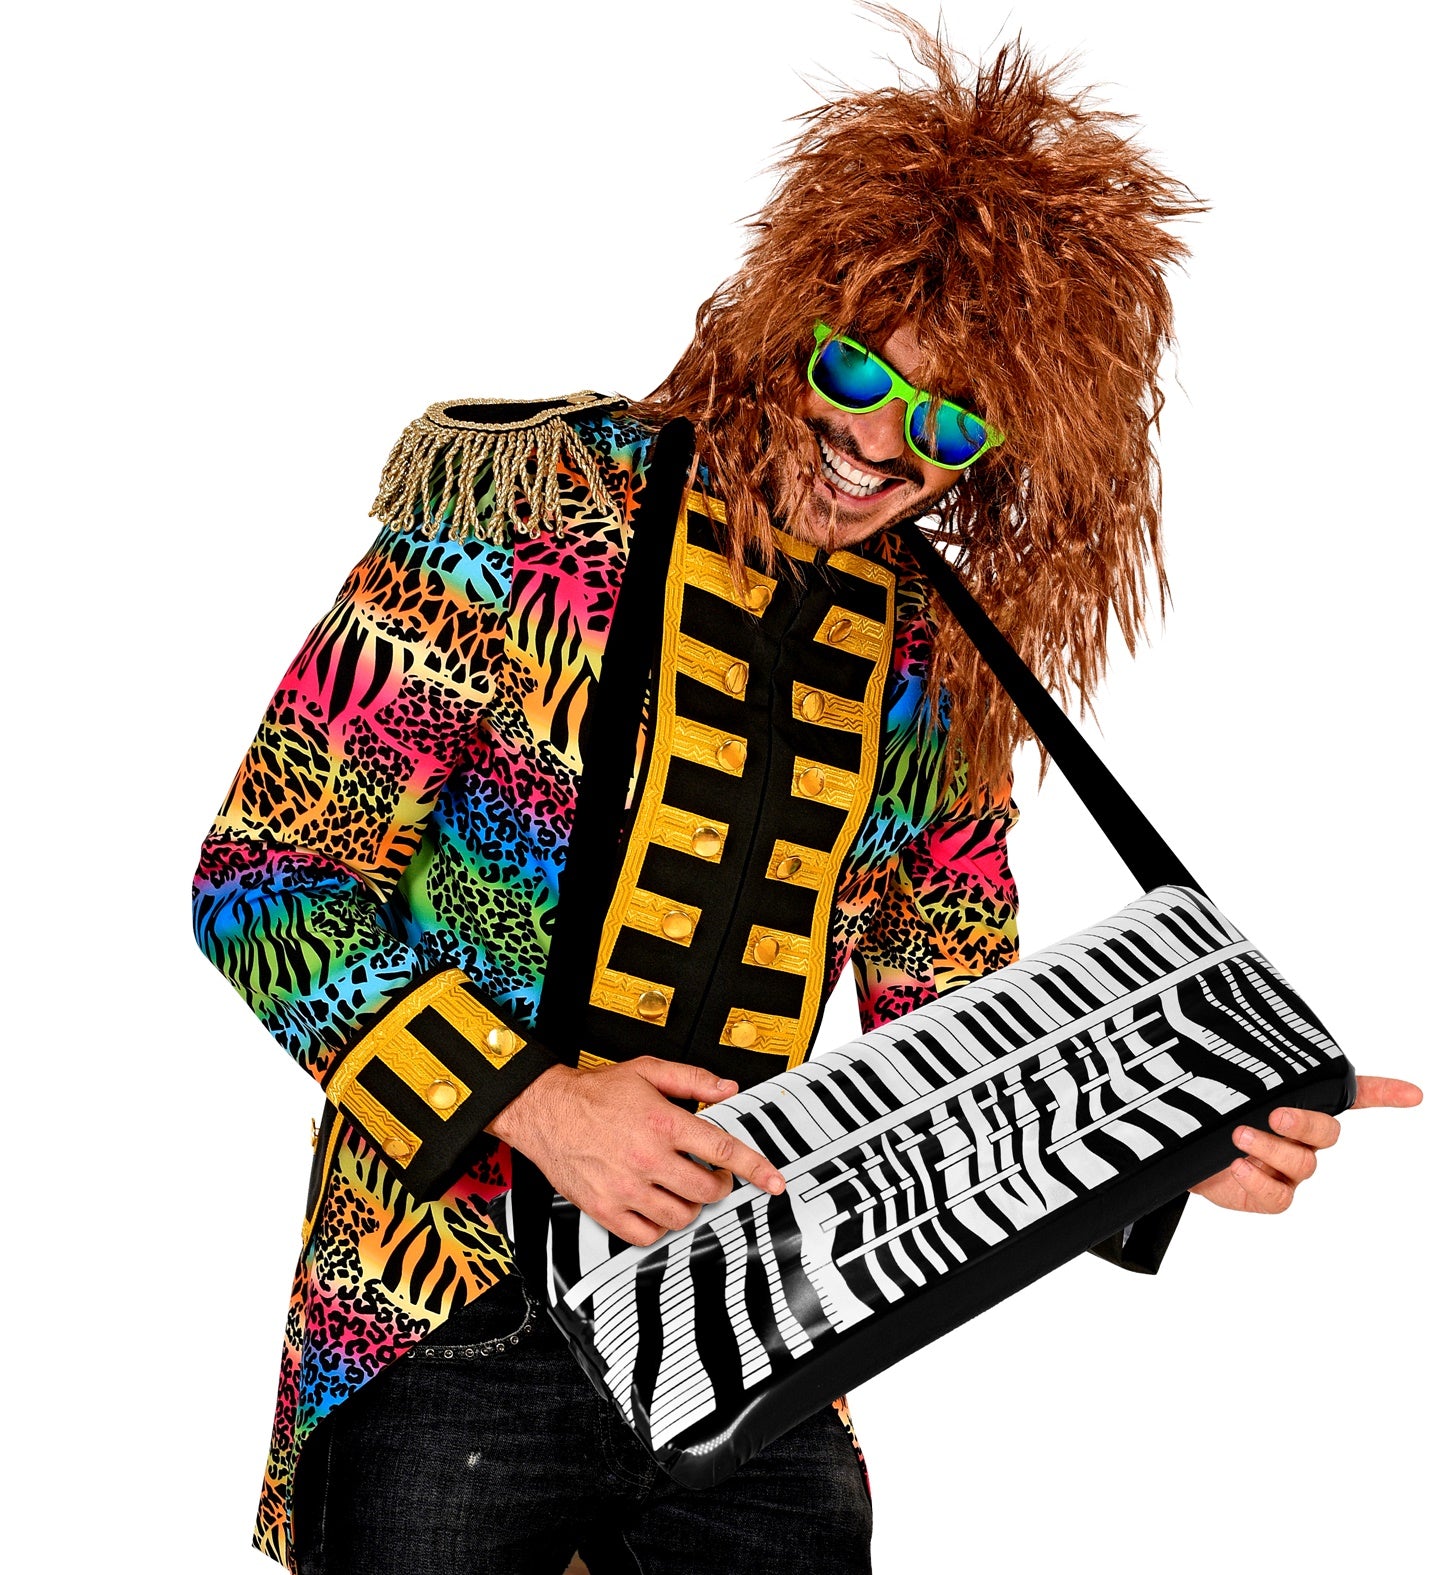 Inflatable Keyboard party prop